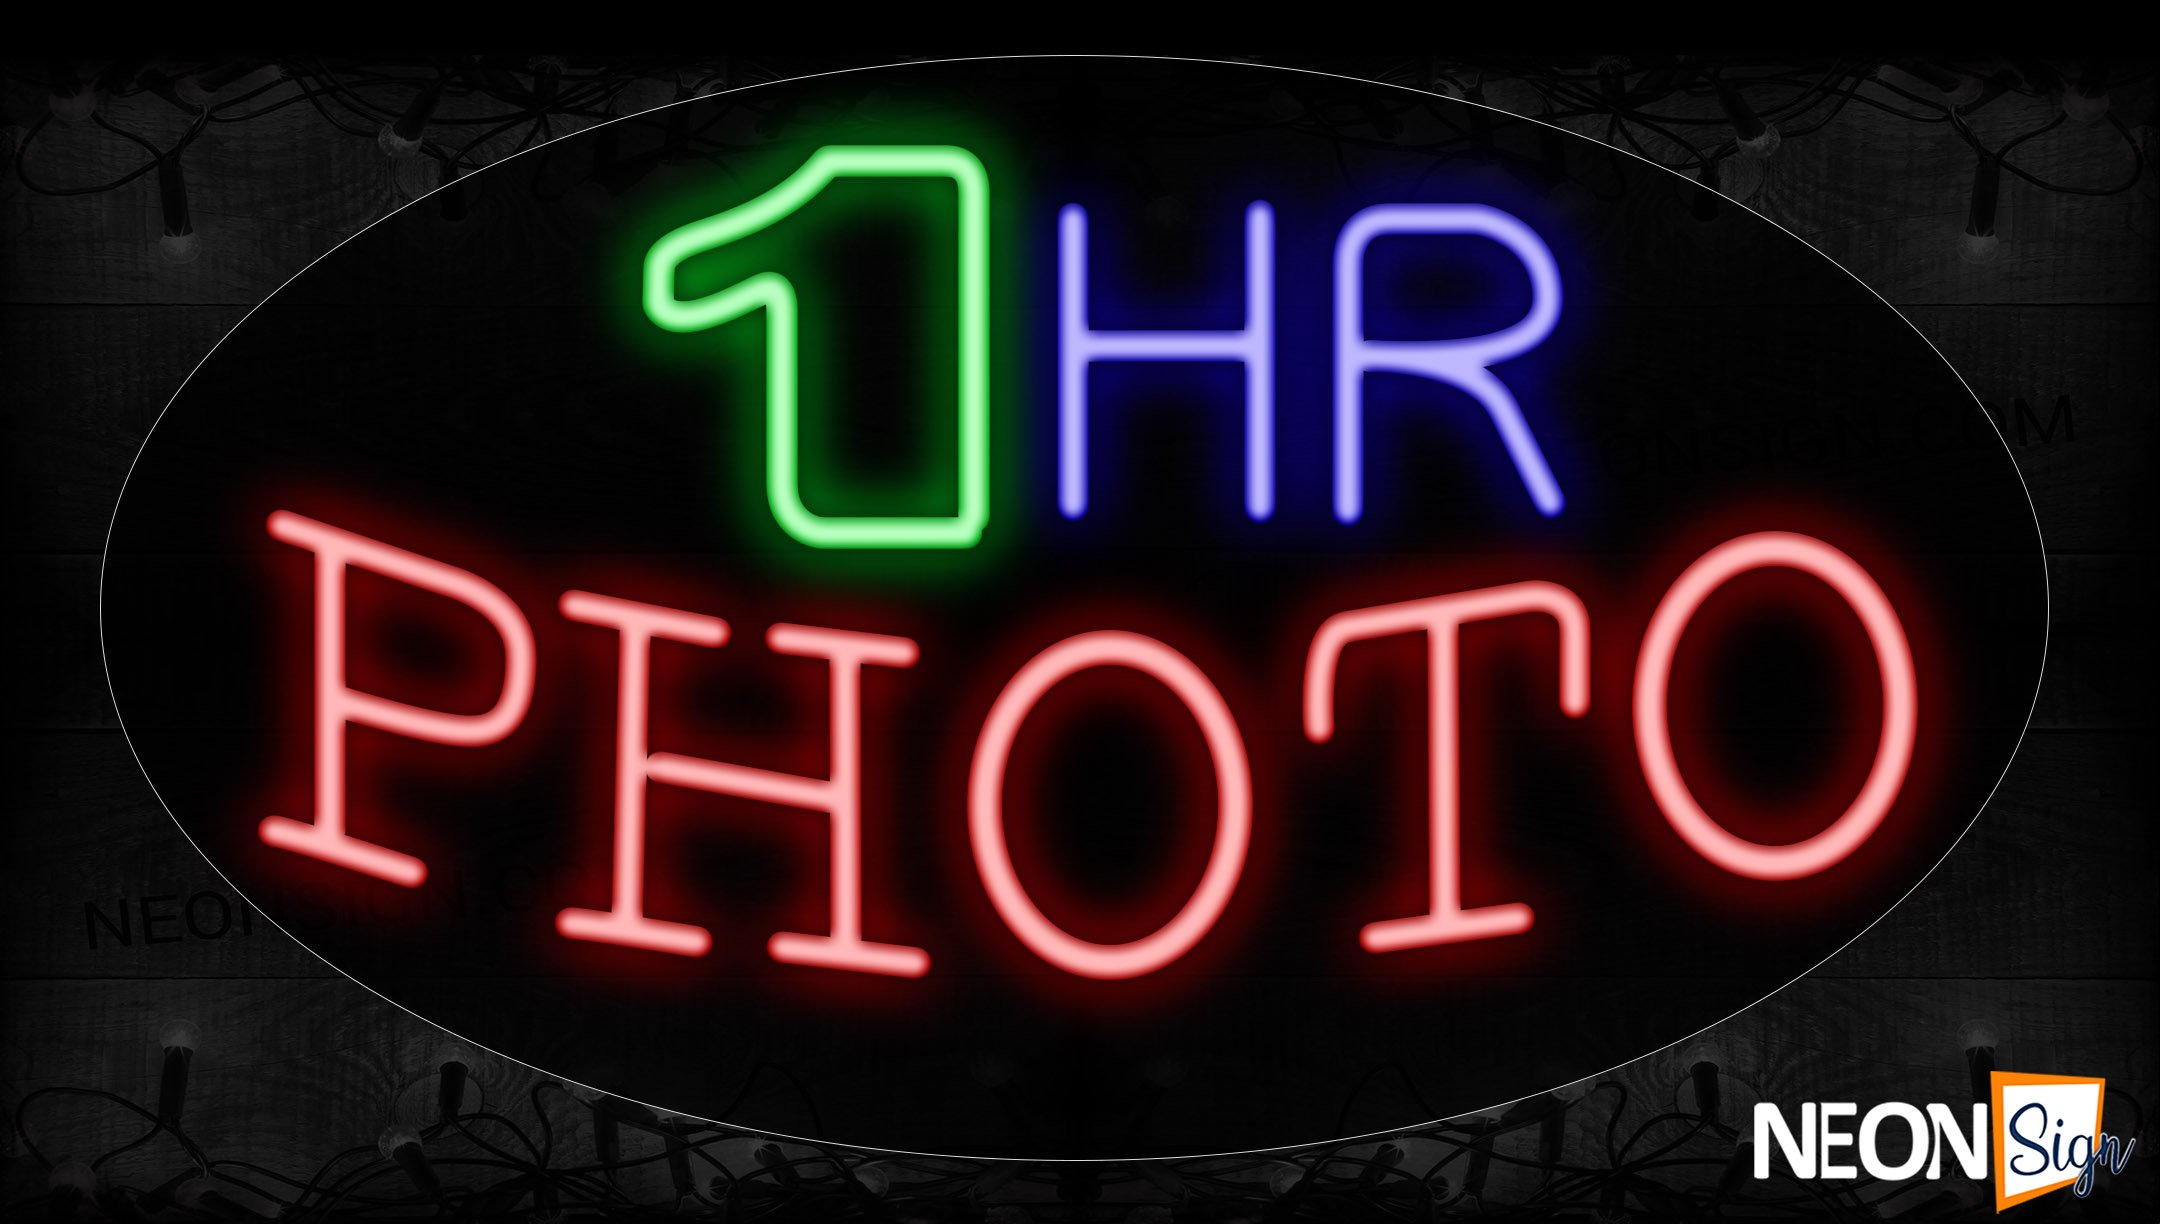 Image of 14292 1 Hr Photo Neon Signs_17x30 Contoured Black Backing